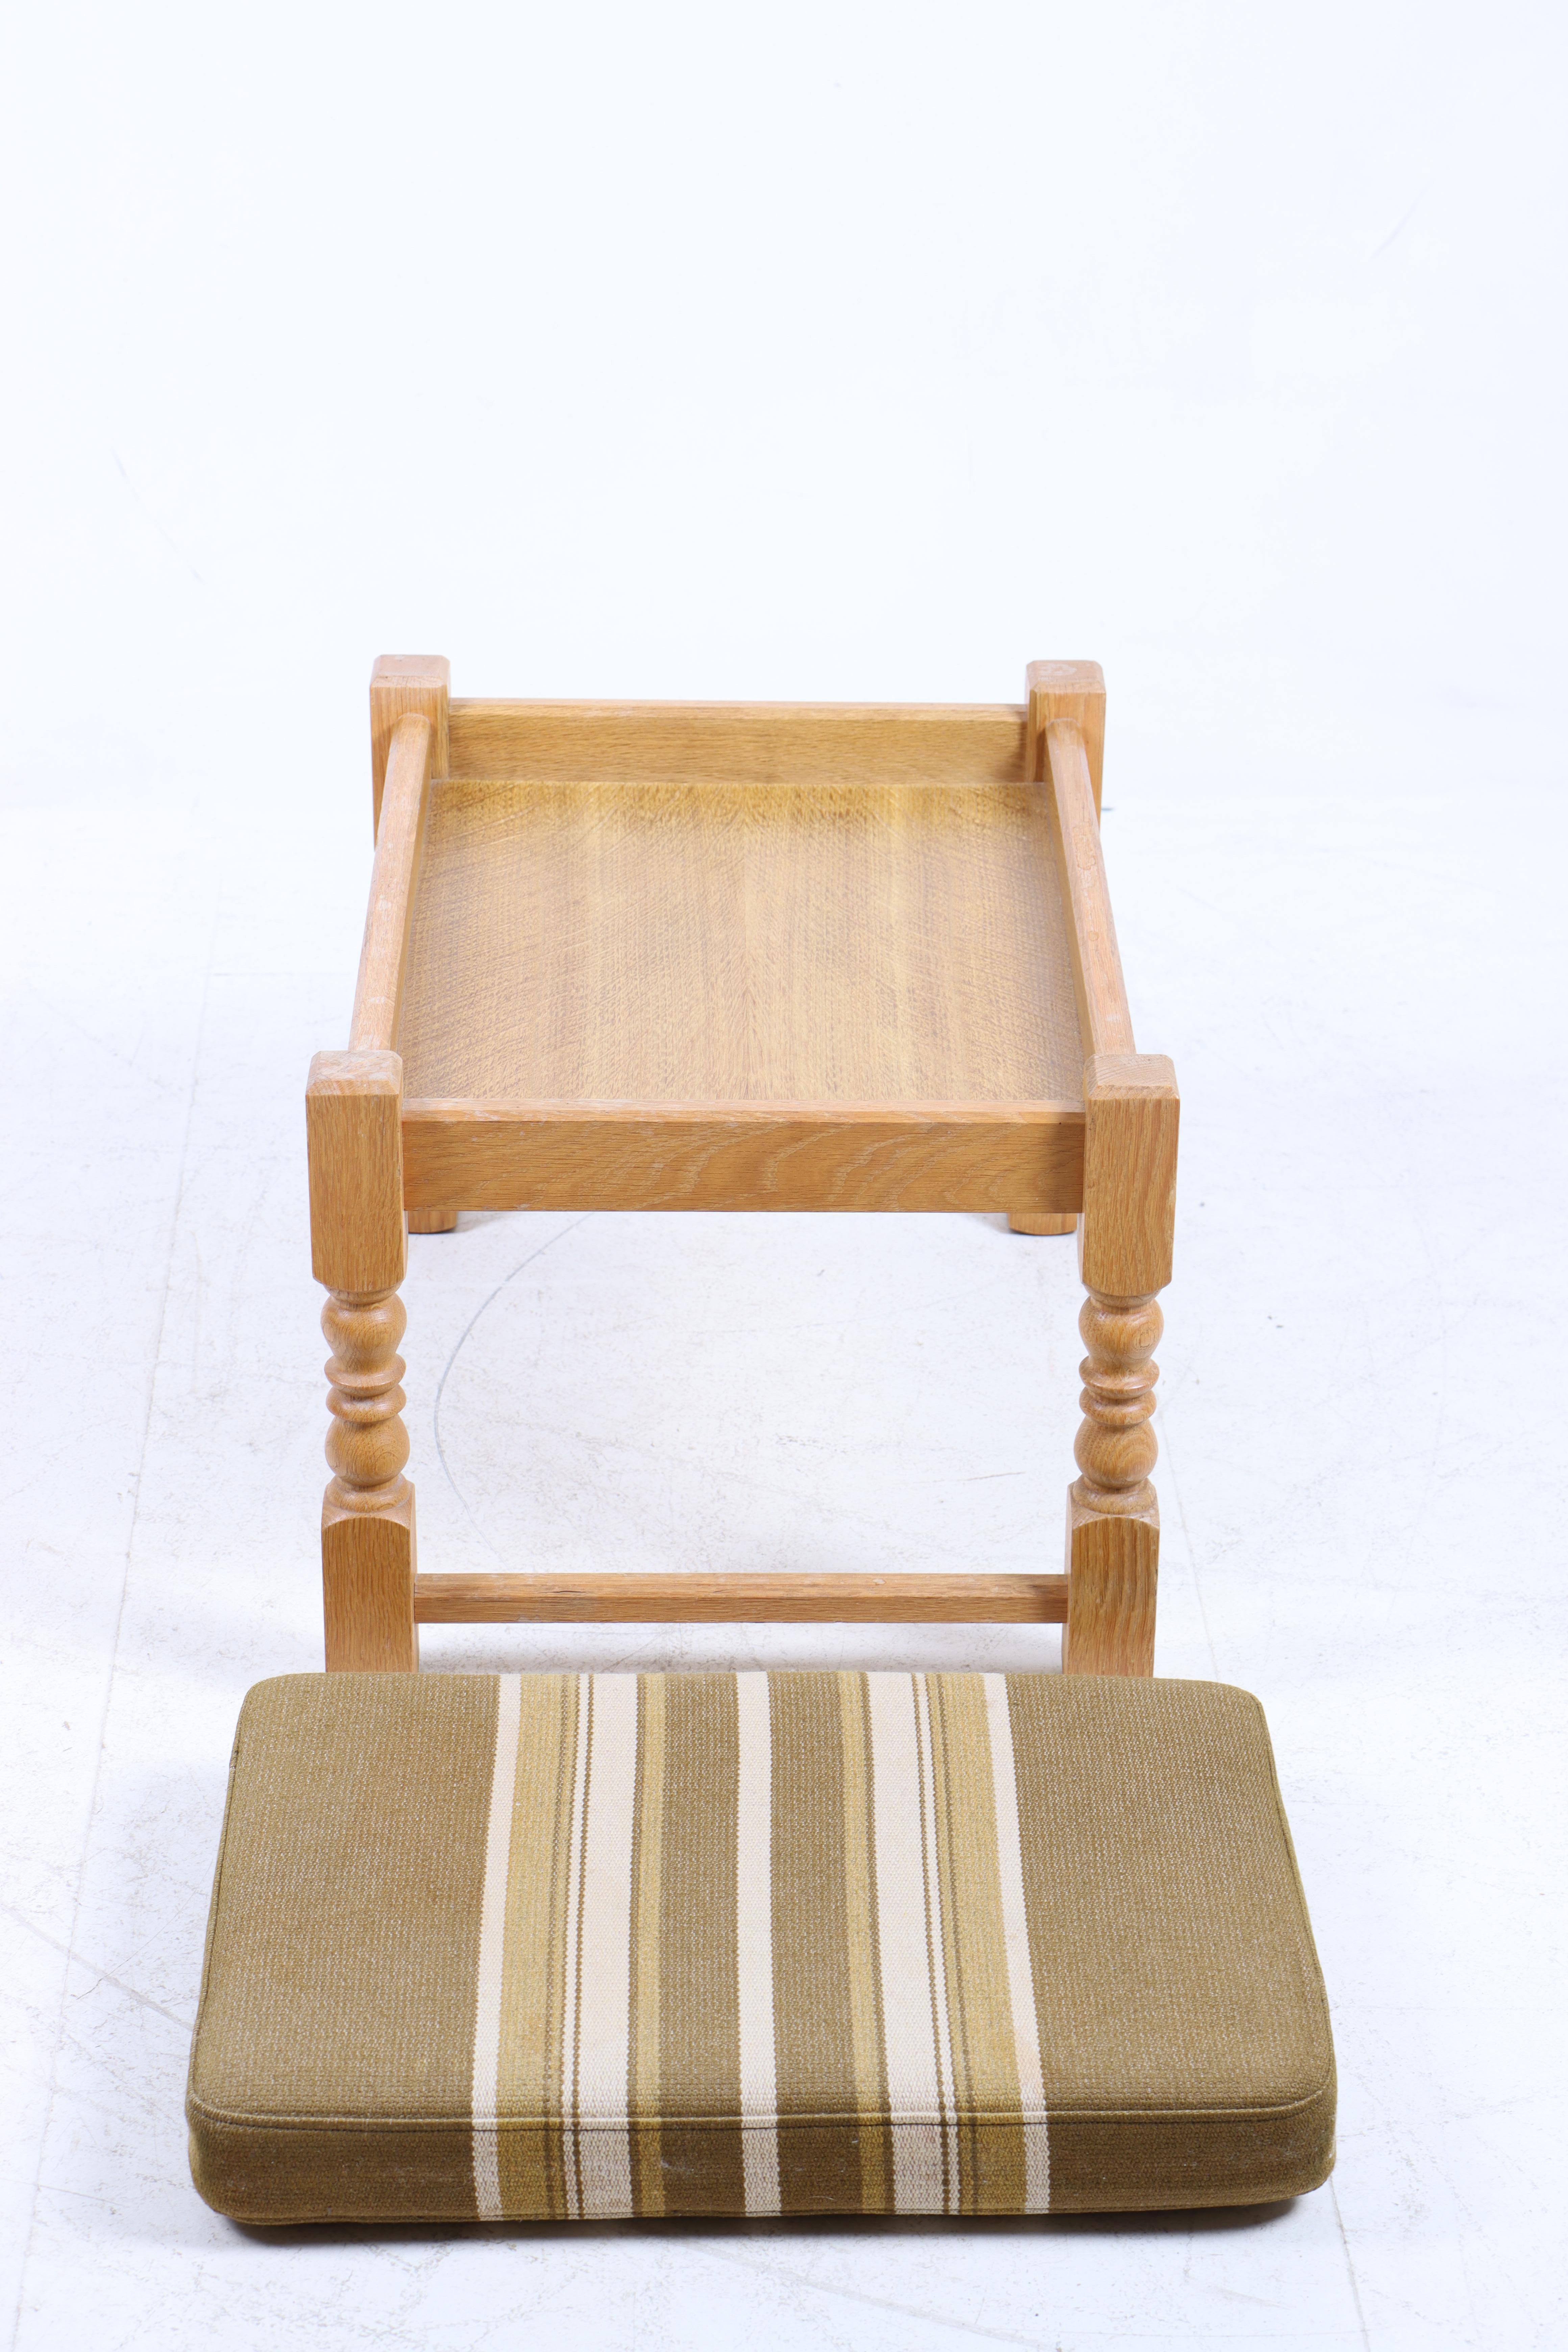 Mid-20th Century Midcentury Stool in Oak, Made in Denmark, 1950s For Sale